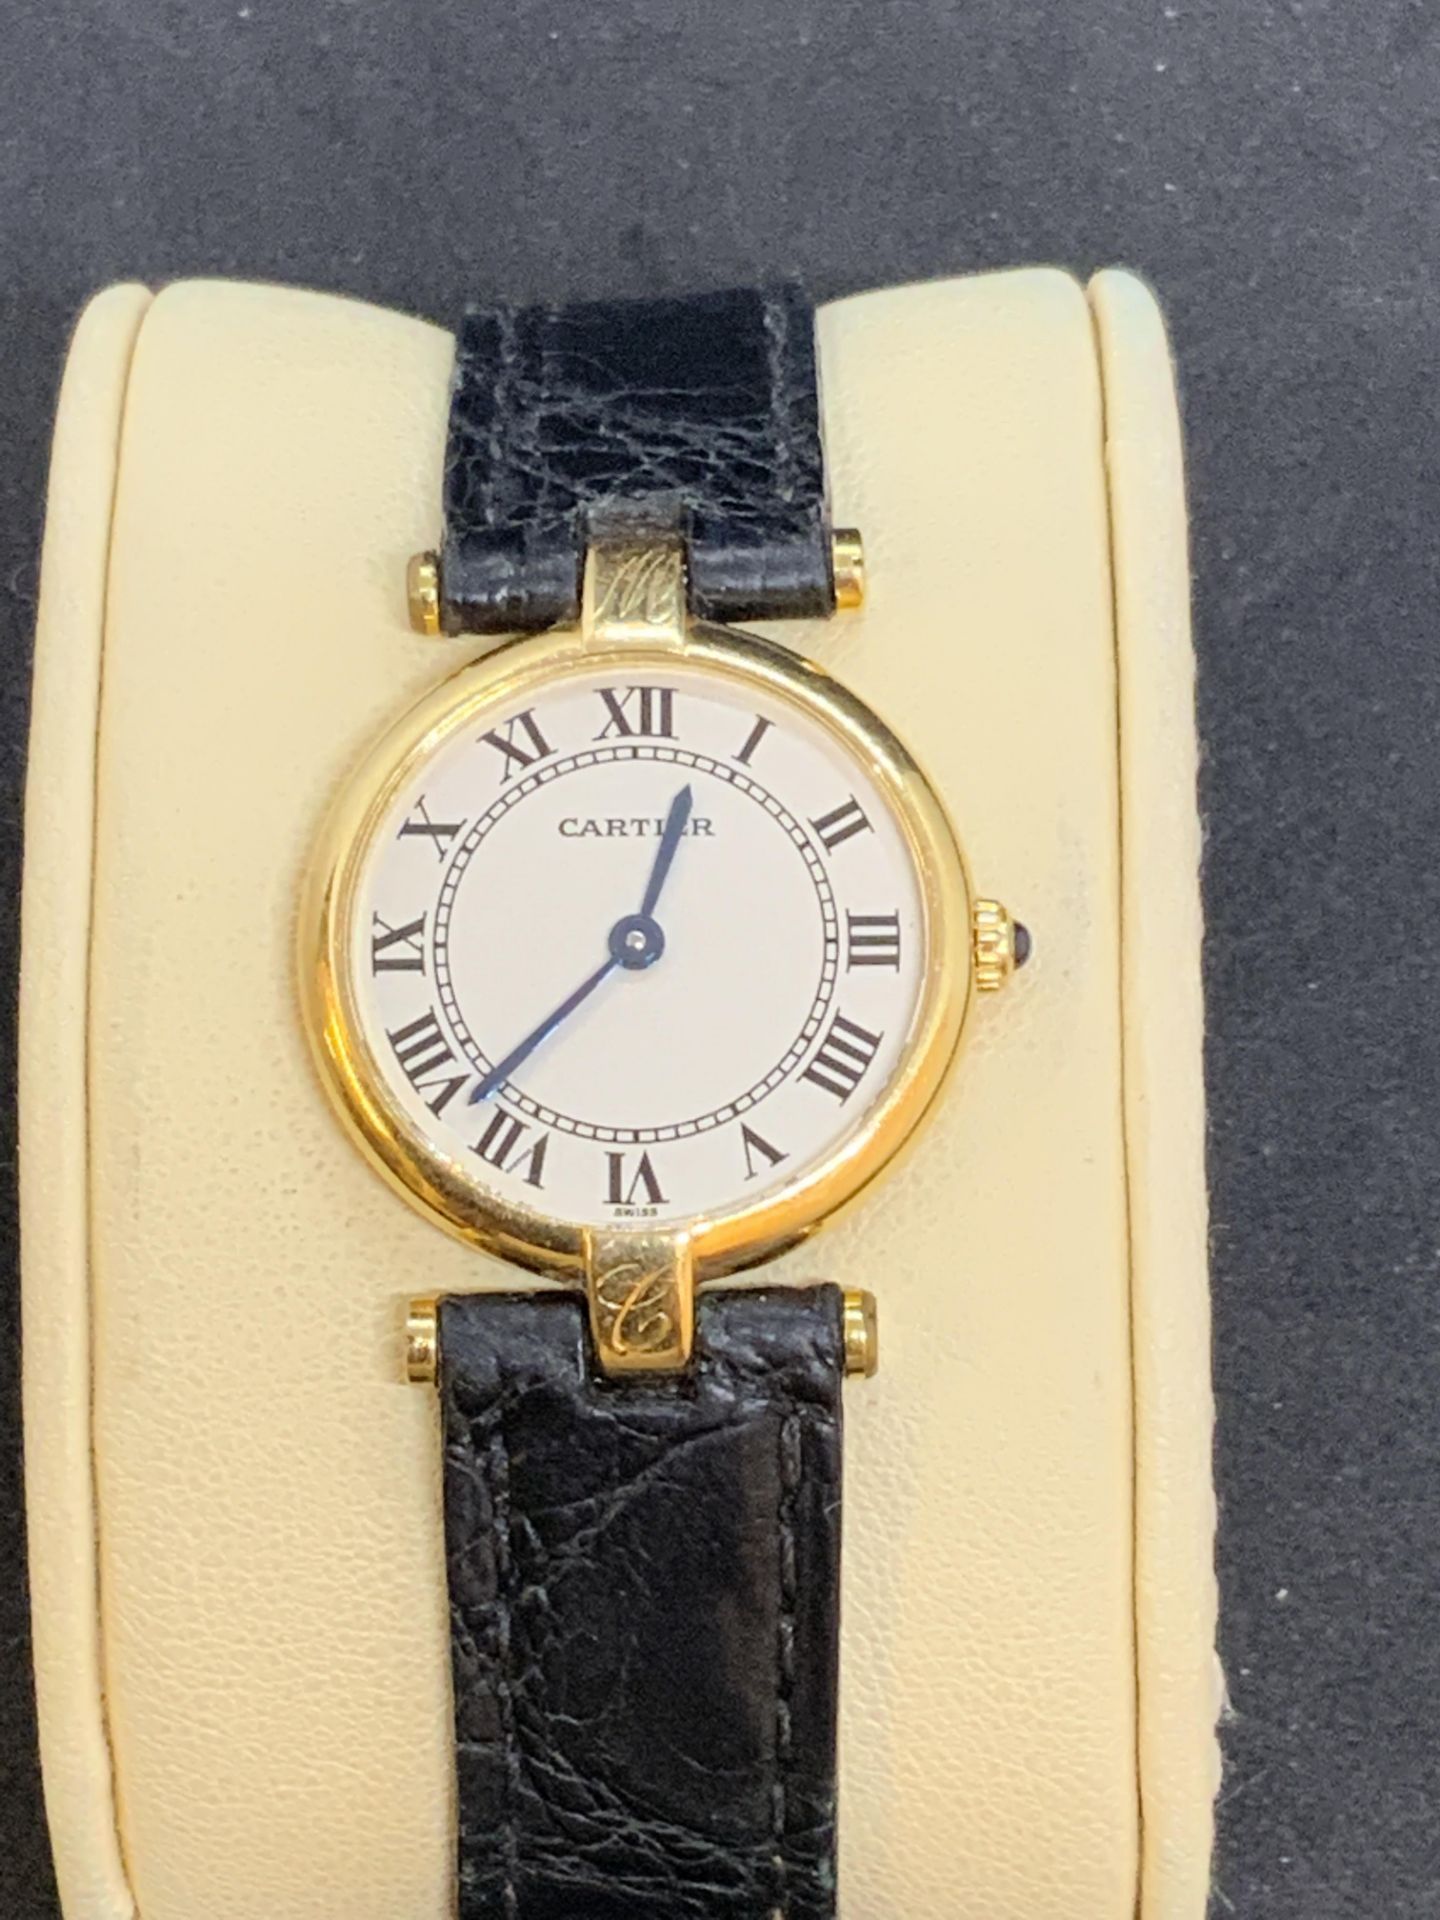 18ct GOLD CARTIER LADIES WATCH WITH 18ct GOLD BUCKLE - 24mm